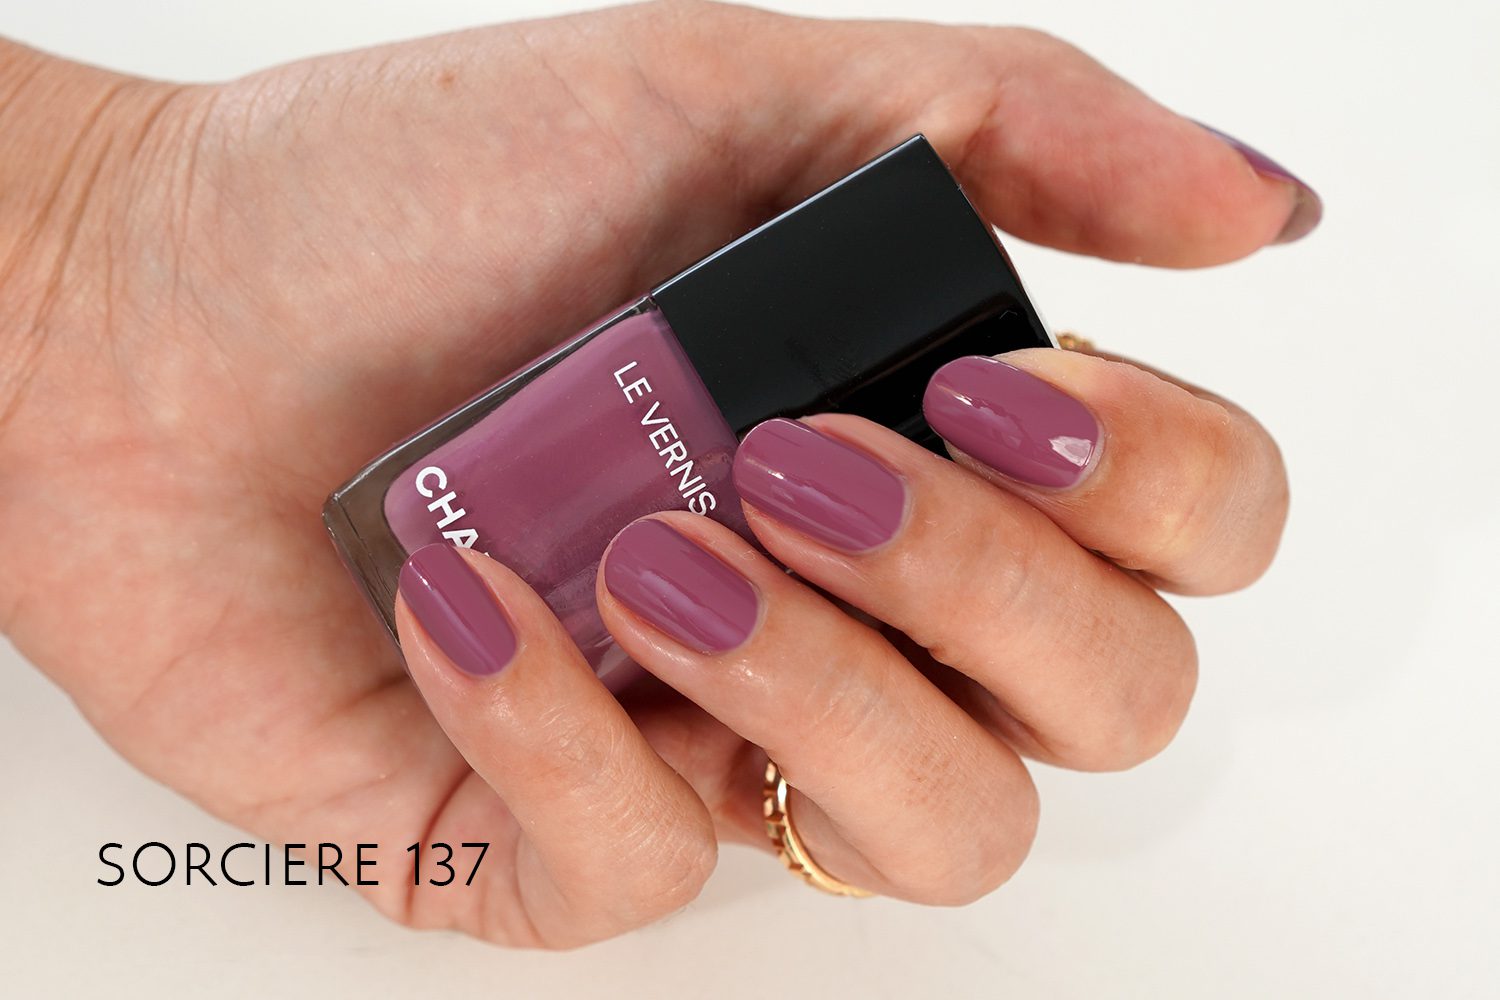 Chanel Le Vernis Nail Colour in Western Light Review: Chanel Hong